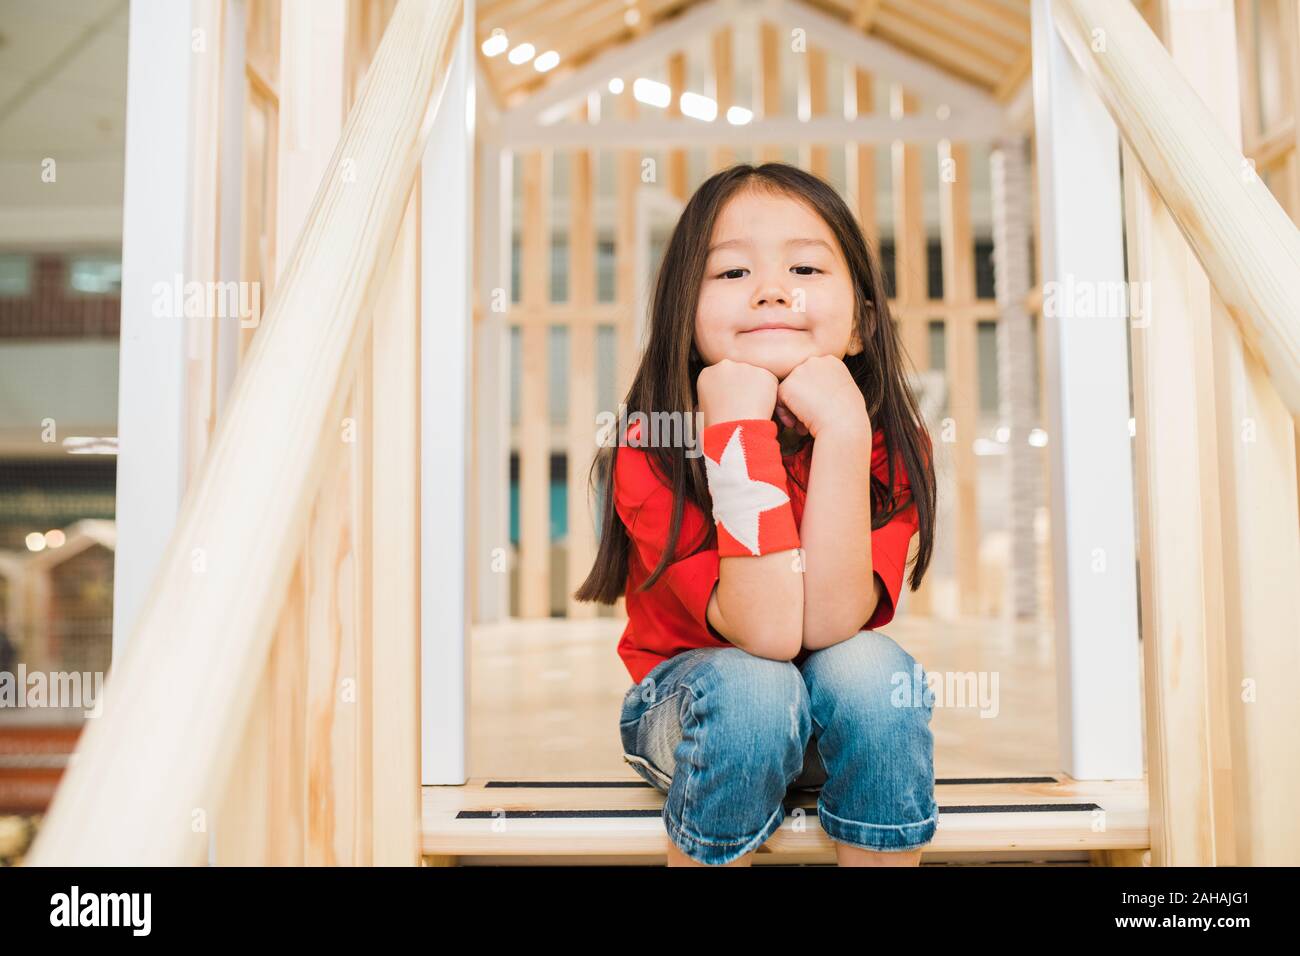 Restful little girl in blue jeans and red t-shirt sitting on wooden stairs Stock Photo